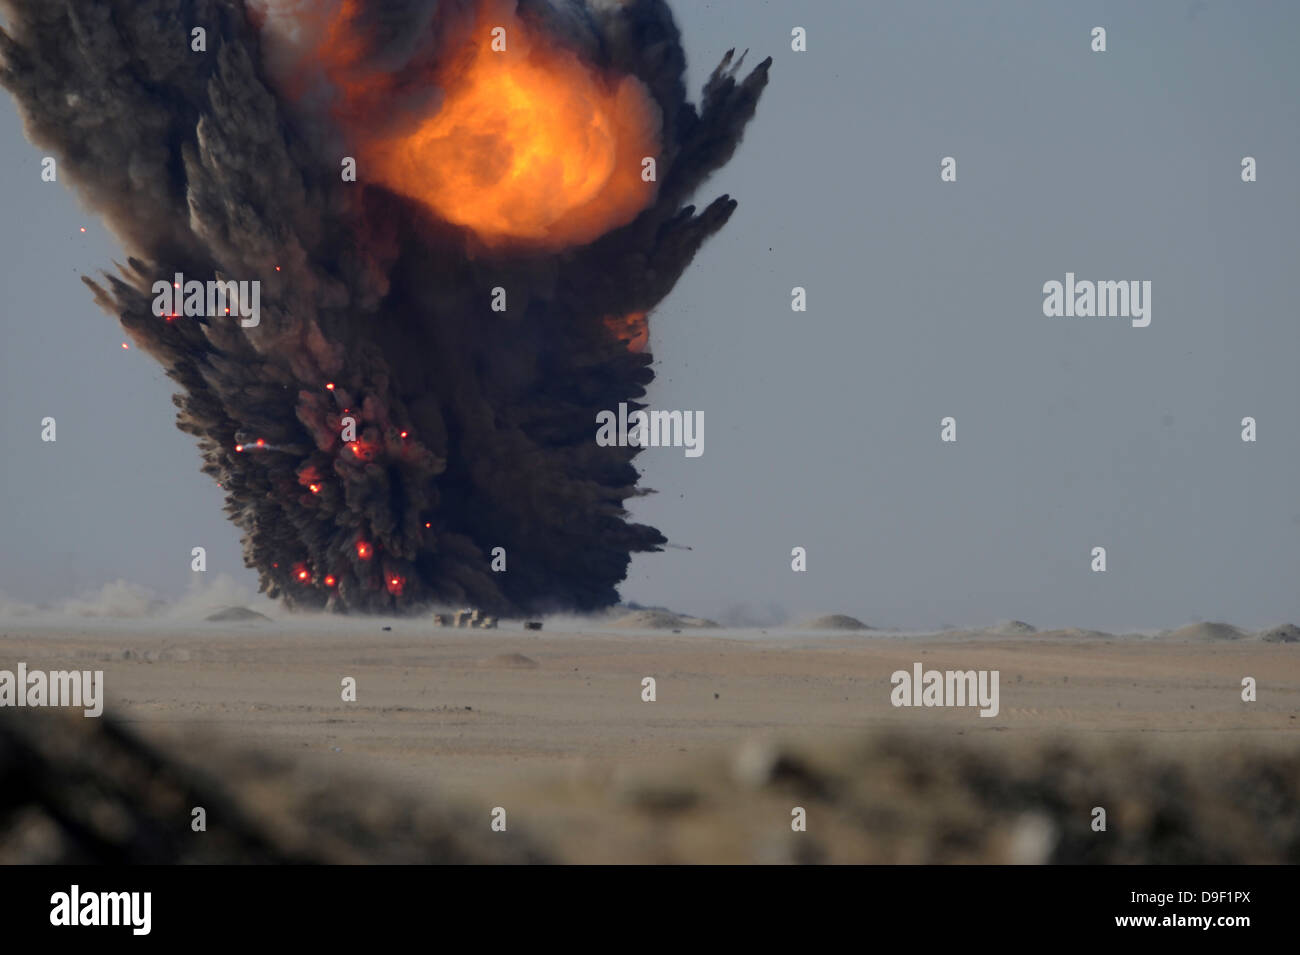 A munitions disposal explosion in Kuwait. Stock Photo